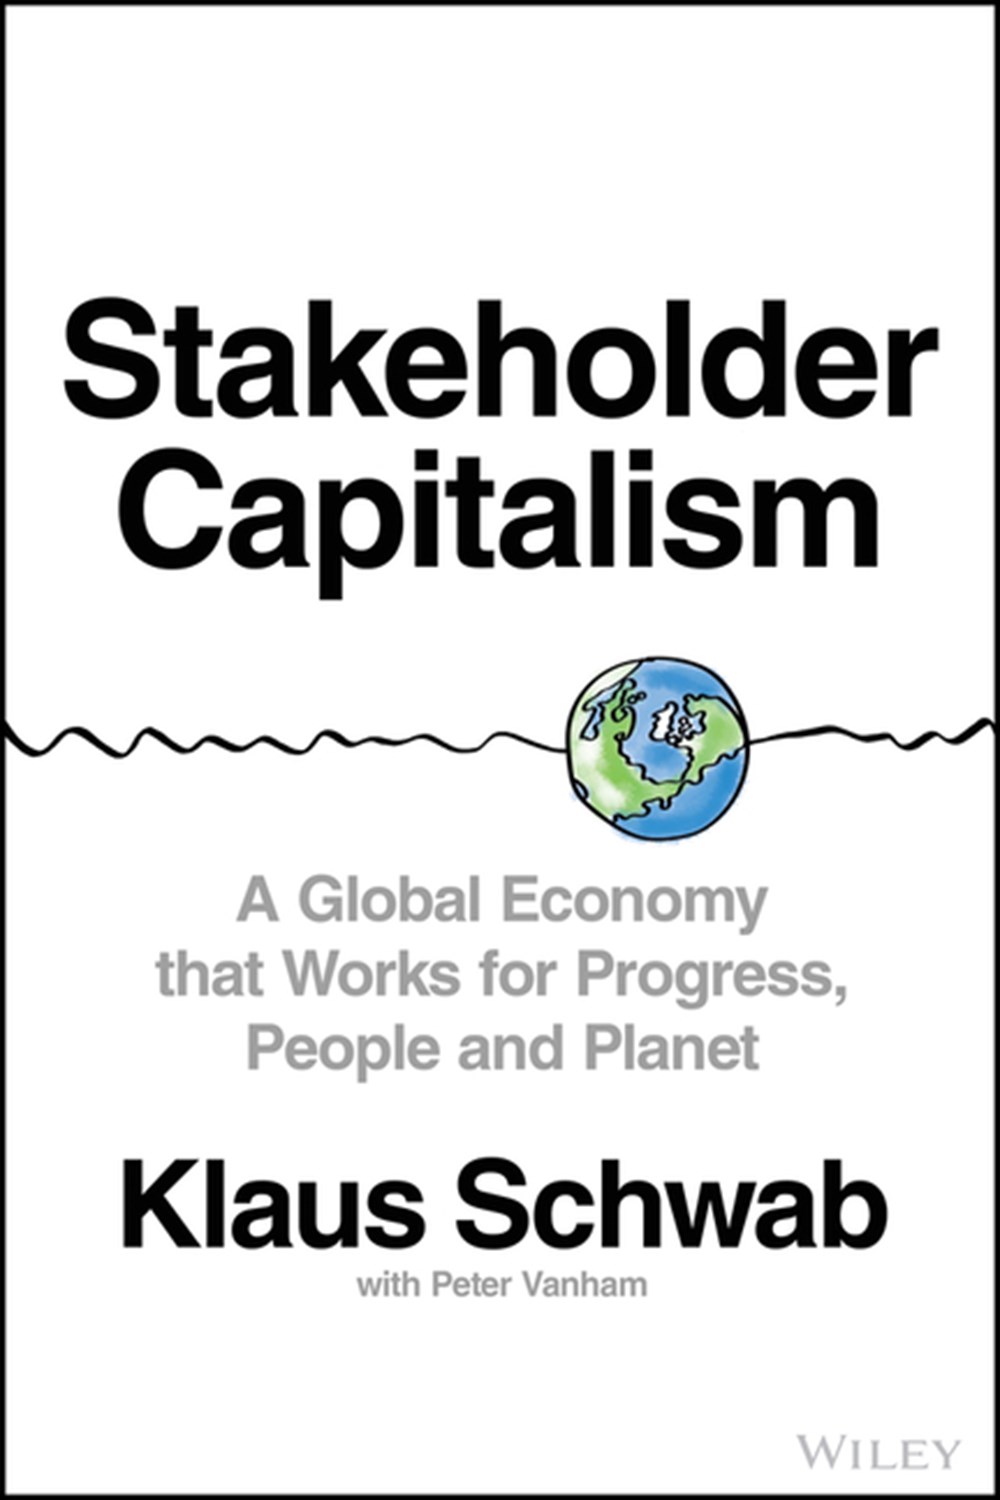 Stakeholder Capitalism A Global Economy That Works for Progress, People and Planet